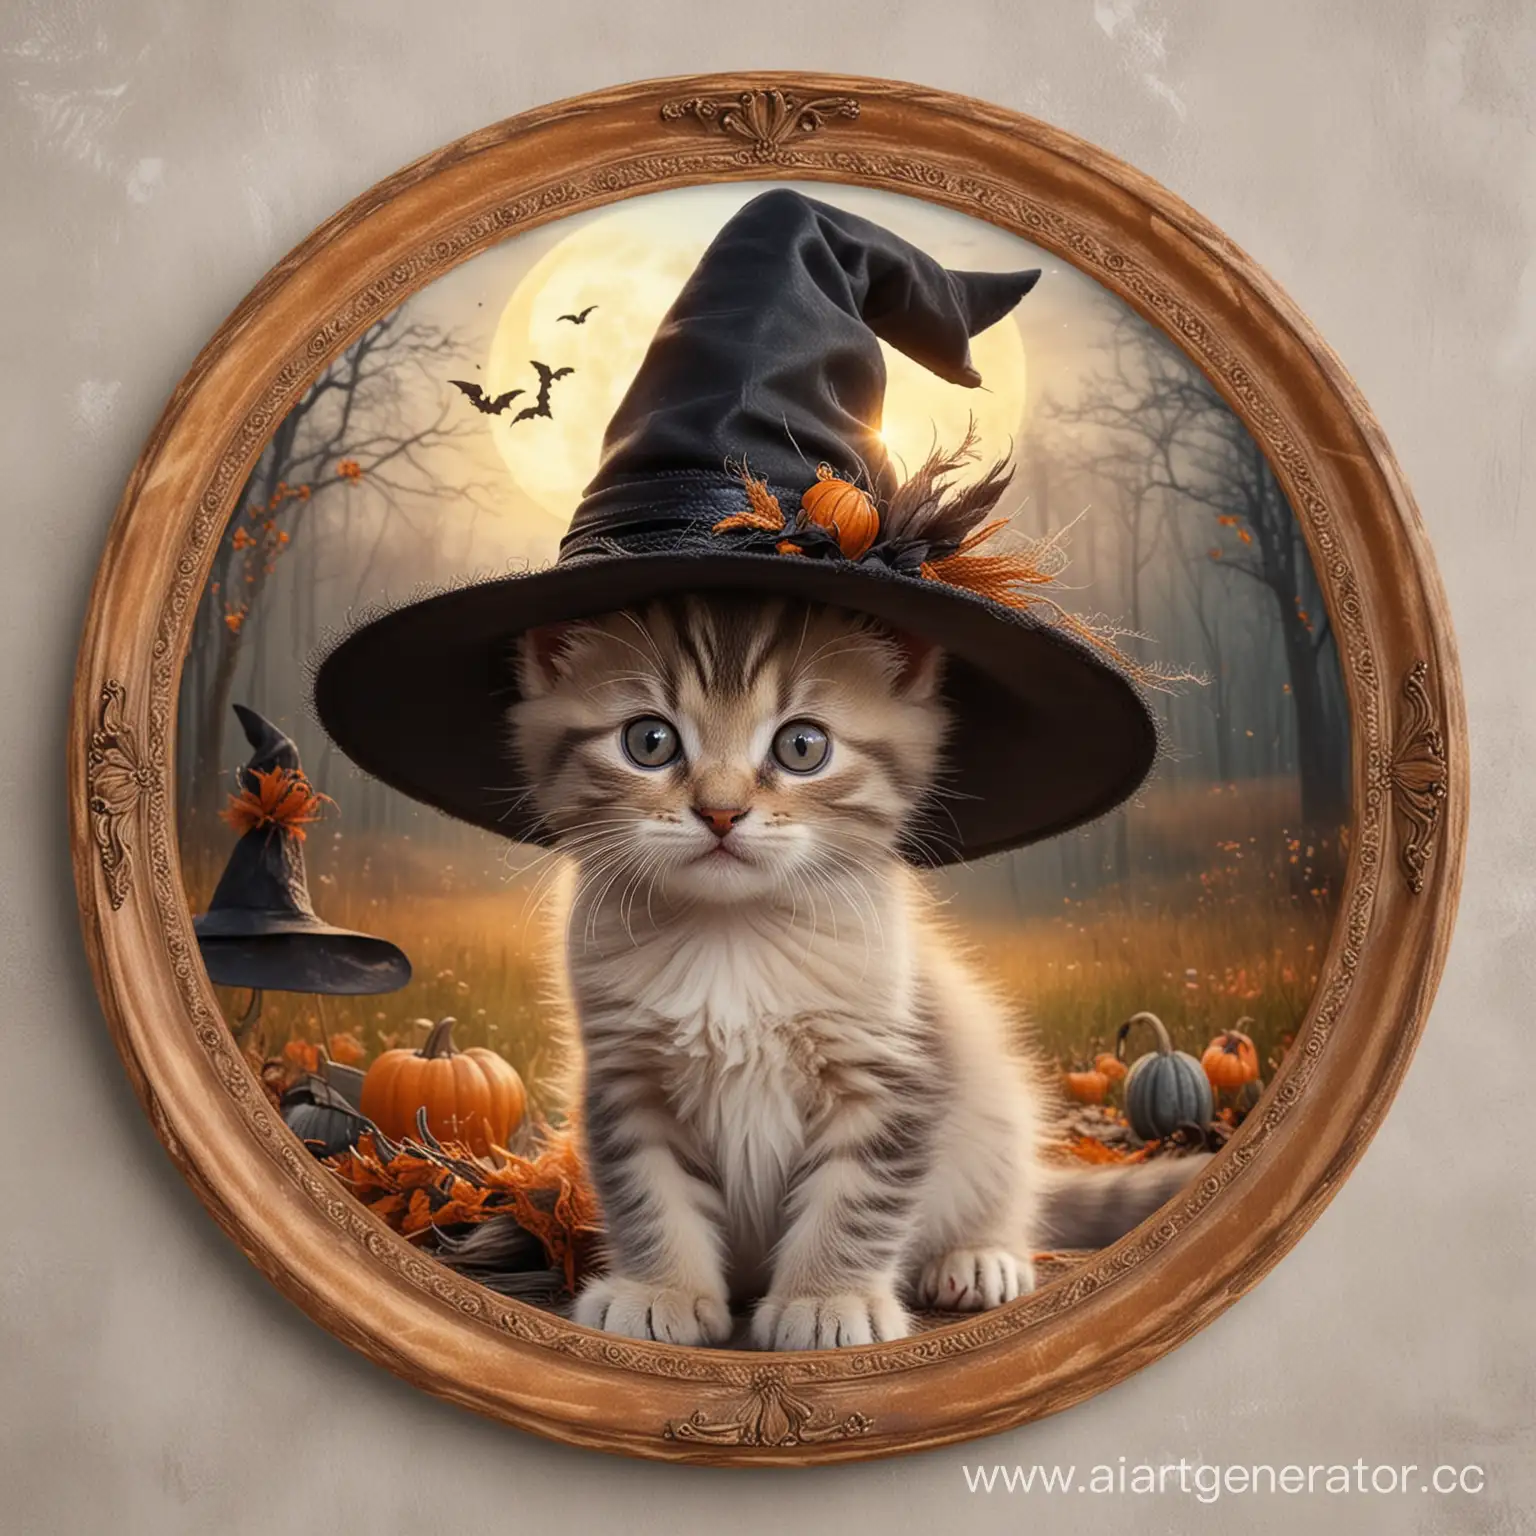 Adorable-Kitten-Wearing-a-Stylish-Witch-Hat-in-Ornate-Circular-Frame